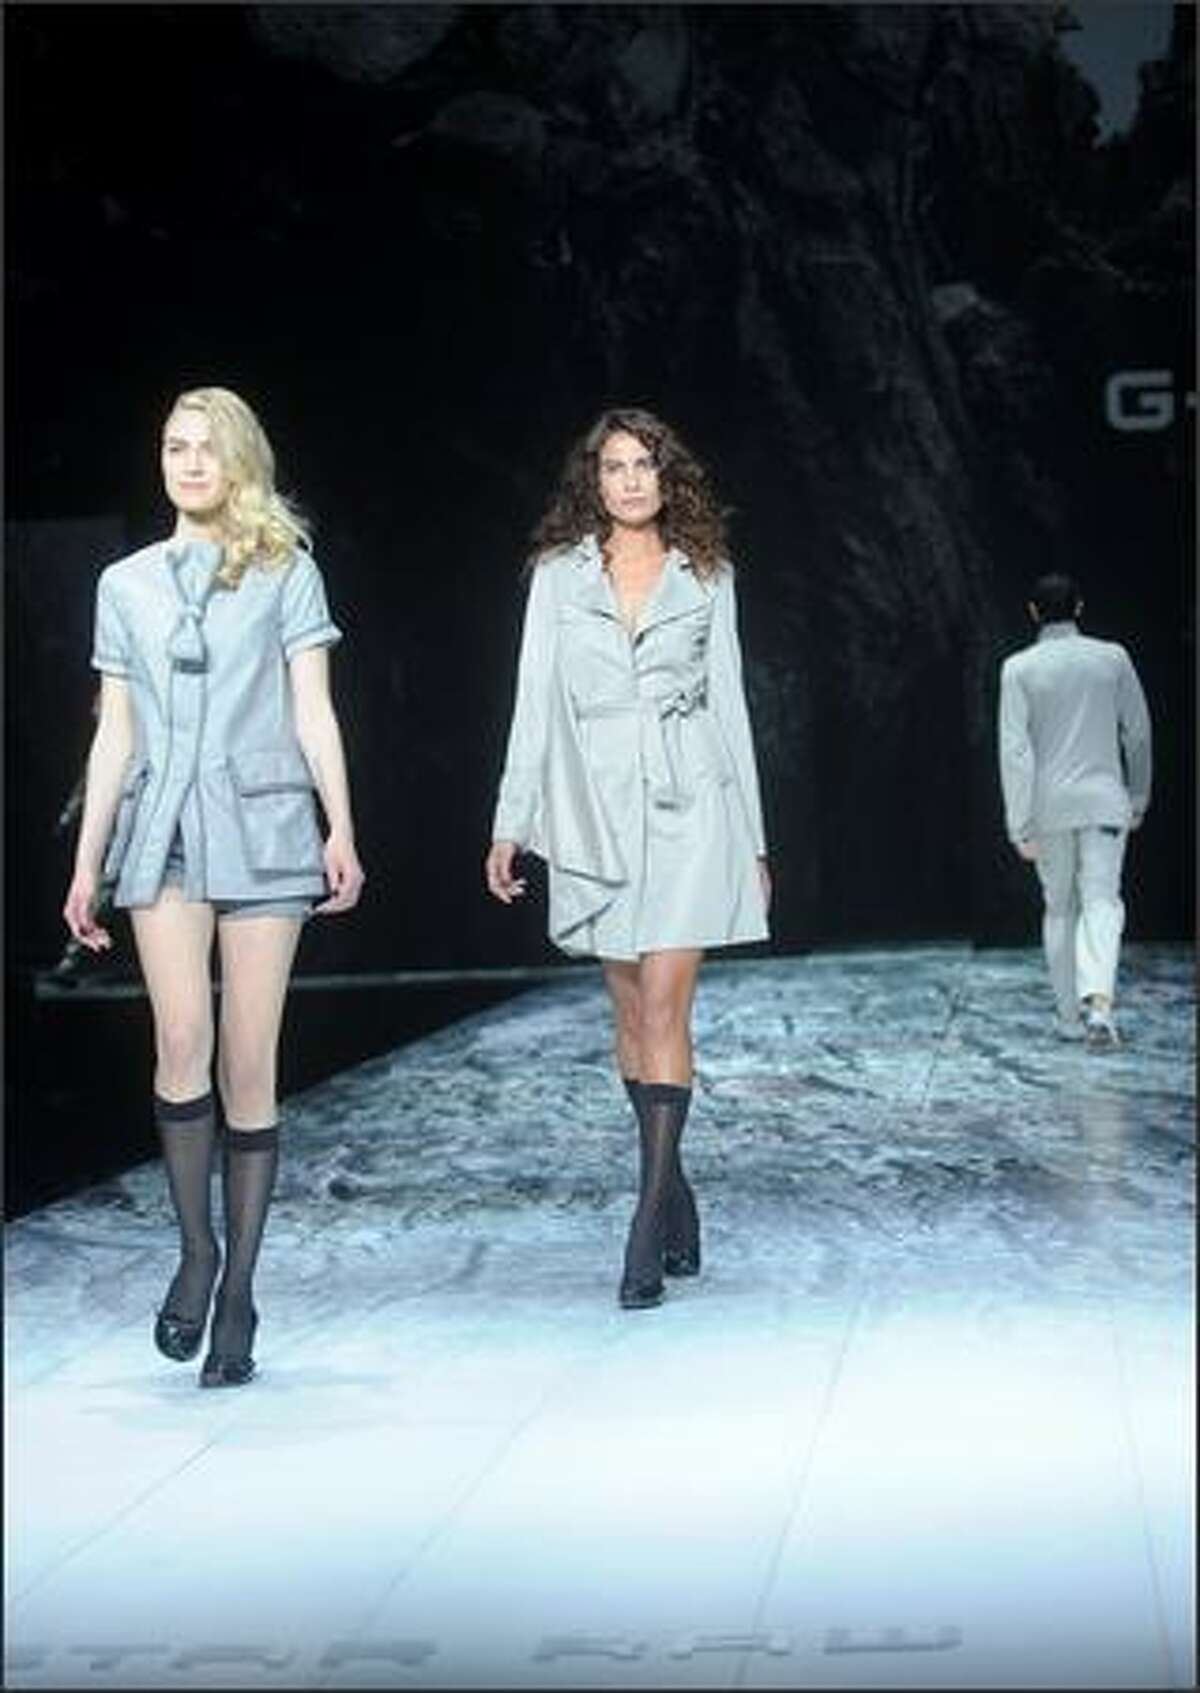 Models walk the runway at the G Star Spring 2009 fashion show during Mercedes-Benz Fashion Week at the Park Avenue Armory in New York on Thursday.